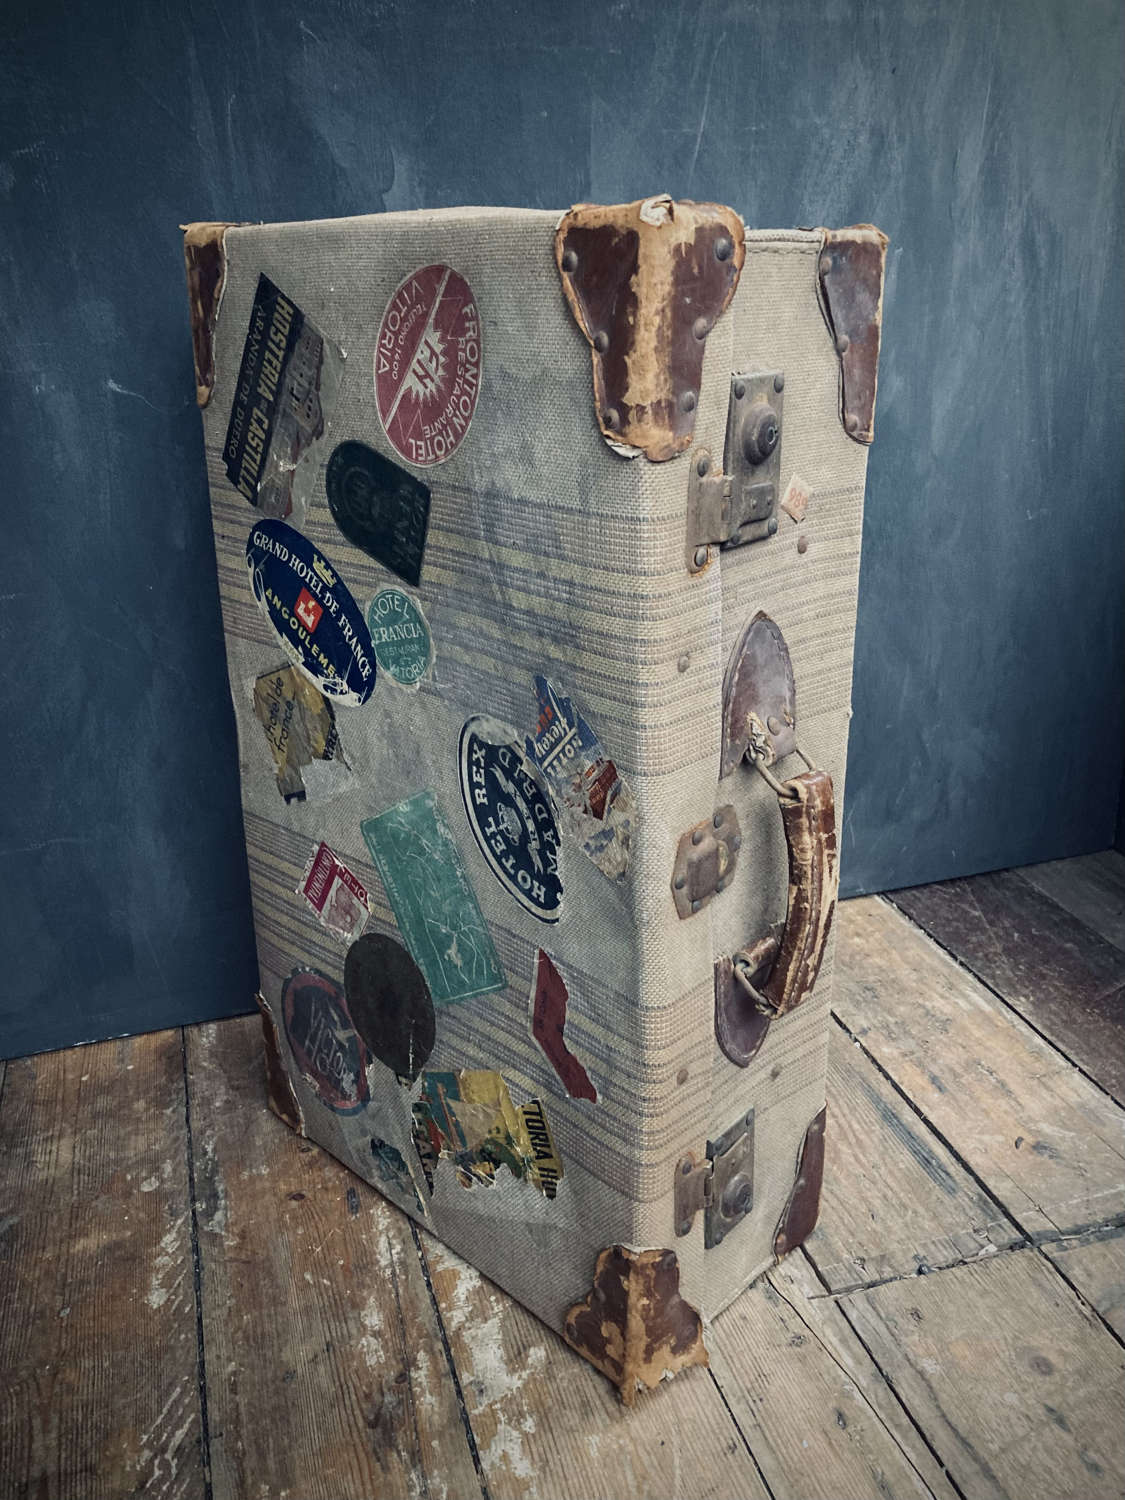 A travel suitcase with destination stickers.